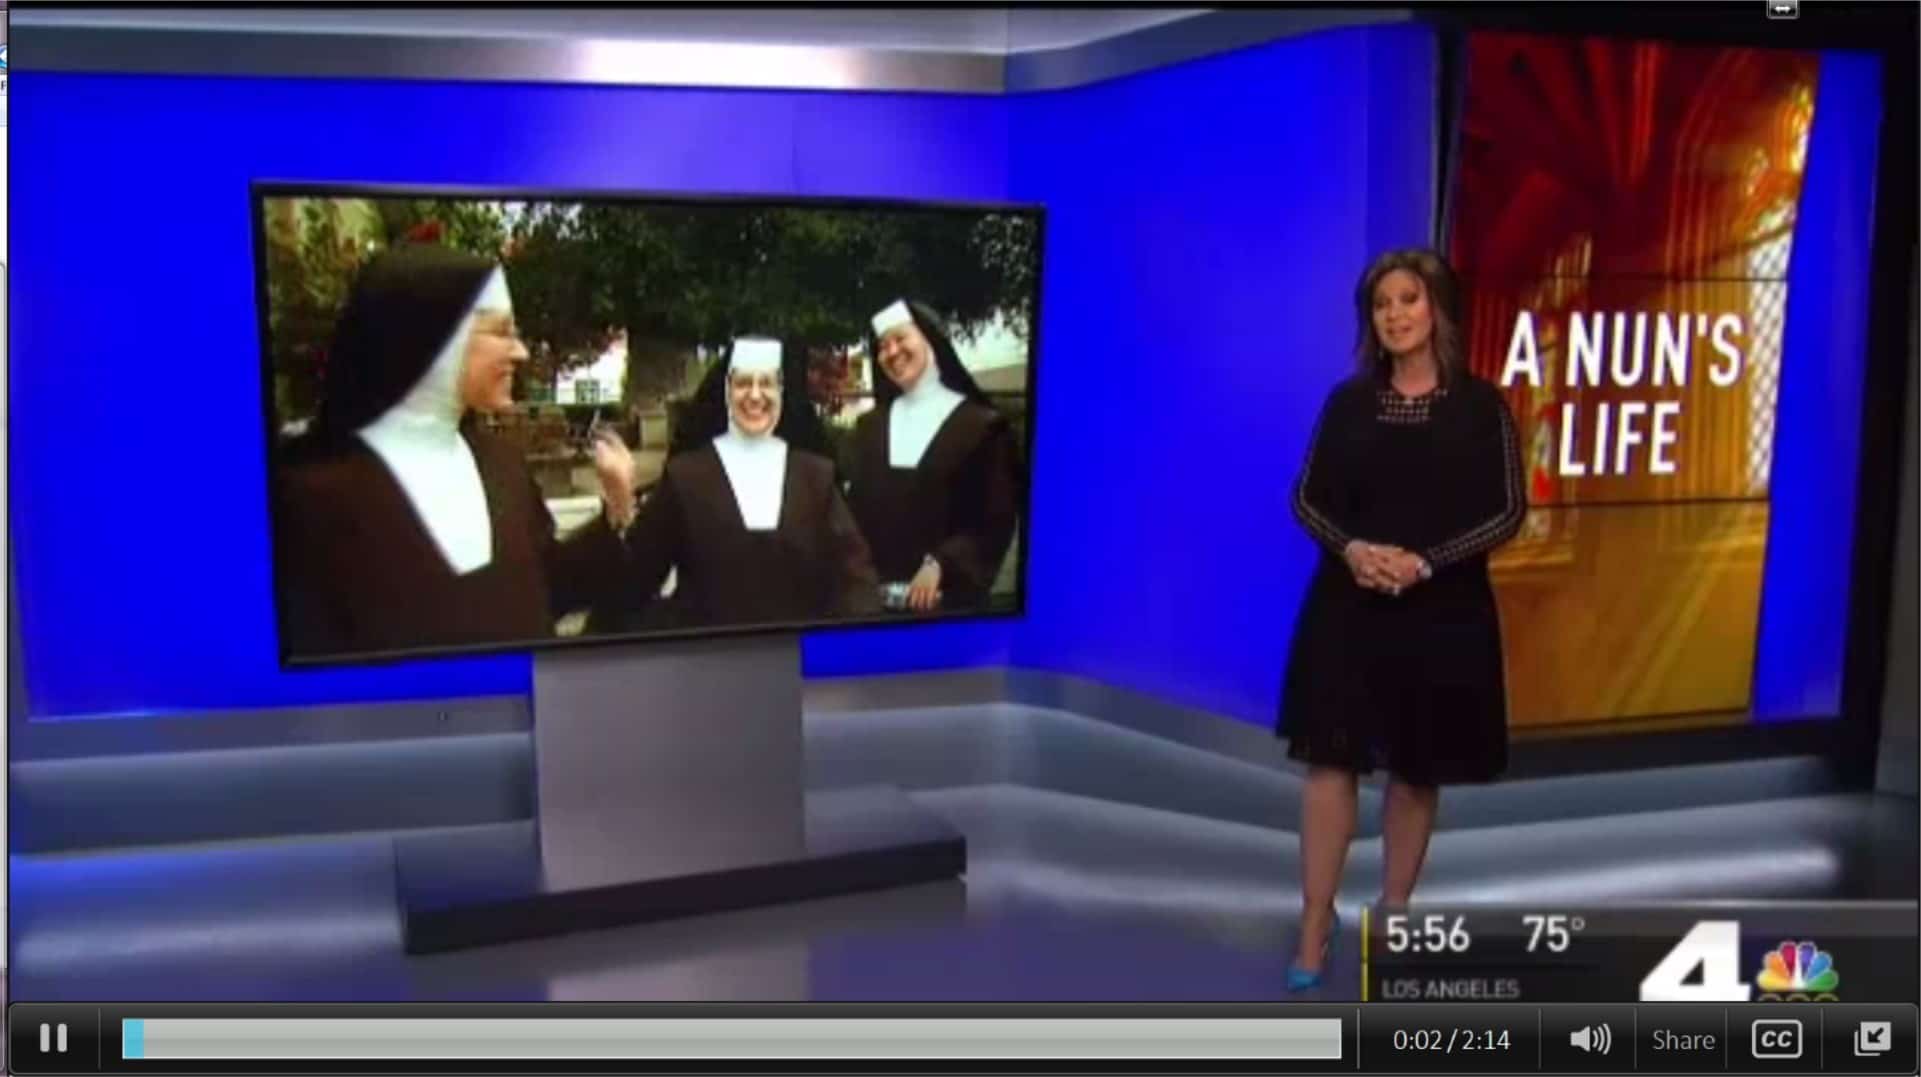 screenshot from NBC4 new, showing sisters and broadcaster, 'a nun's life'